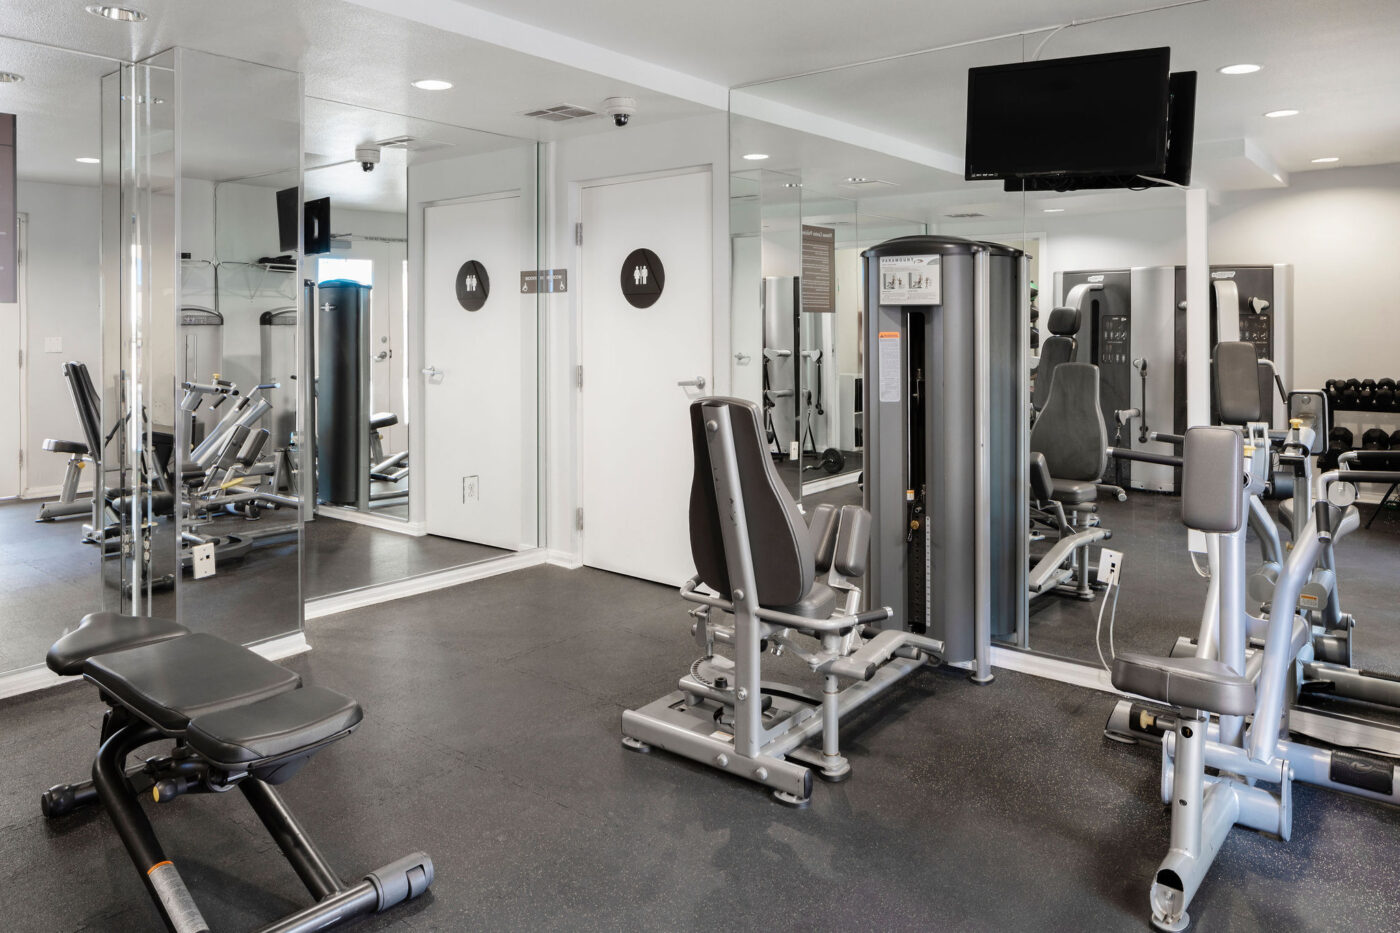 Indoor fitness center with equipment and mirrors